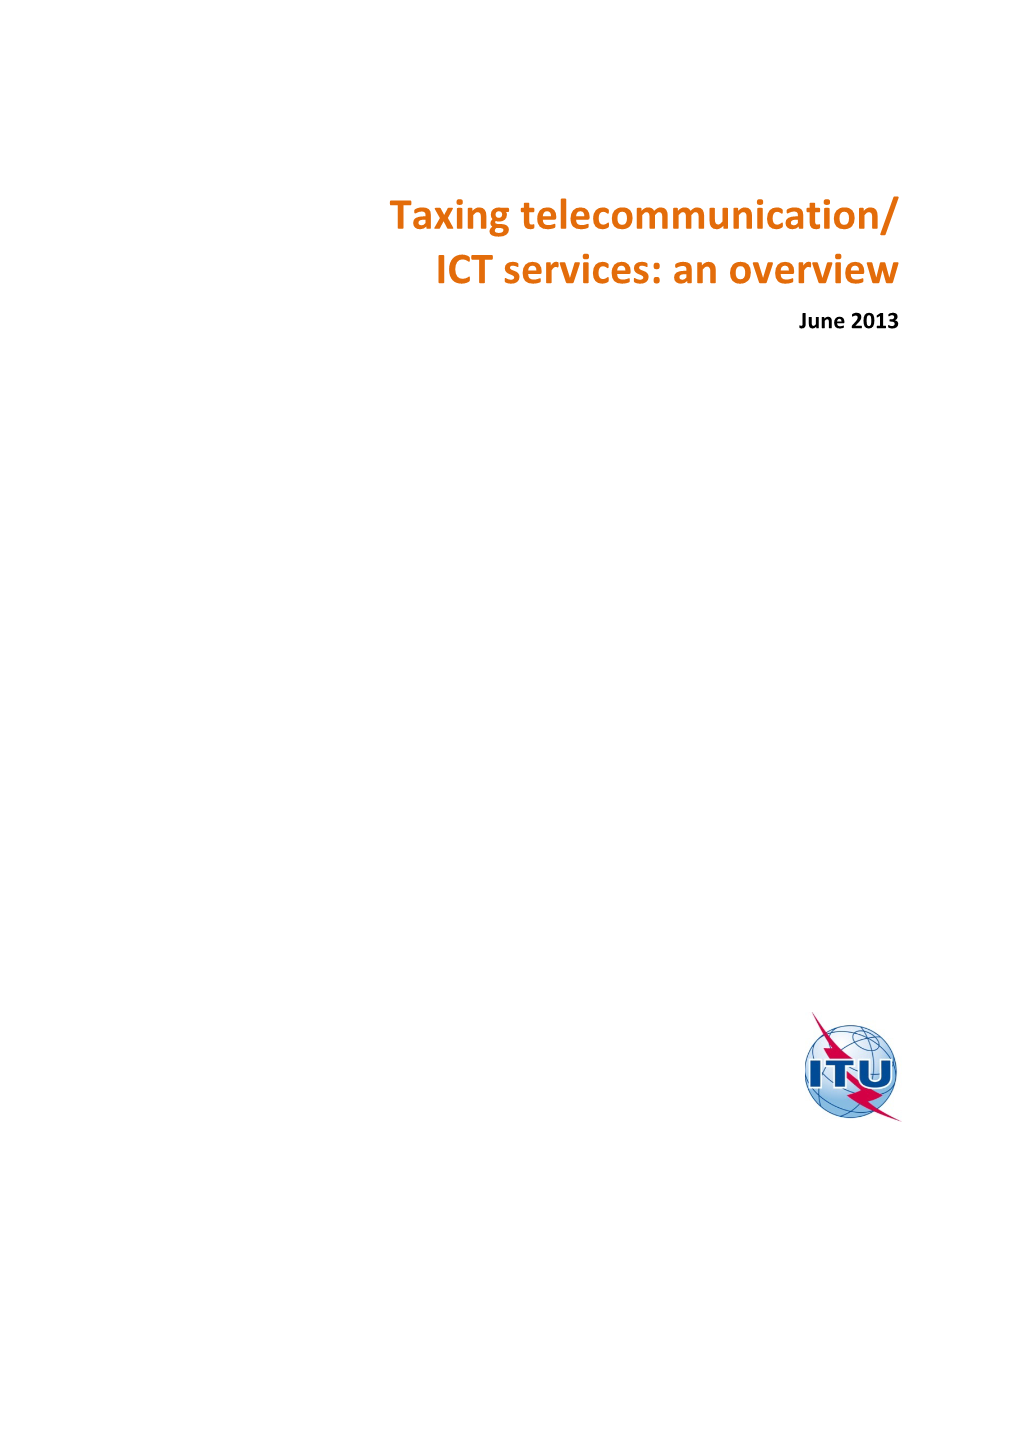 Taxing Telecommunications/ICT Services: an Overview